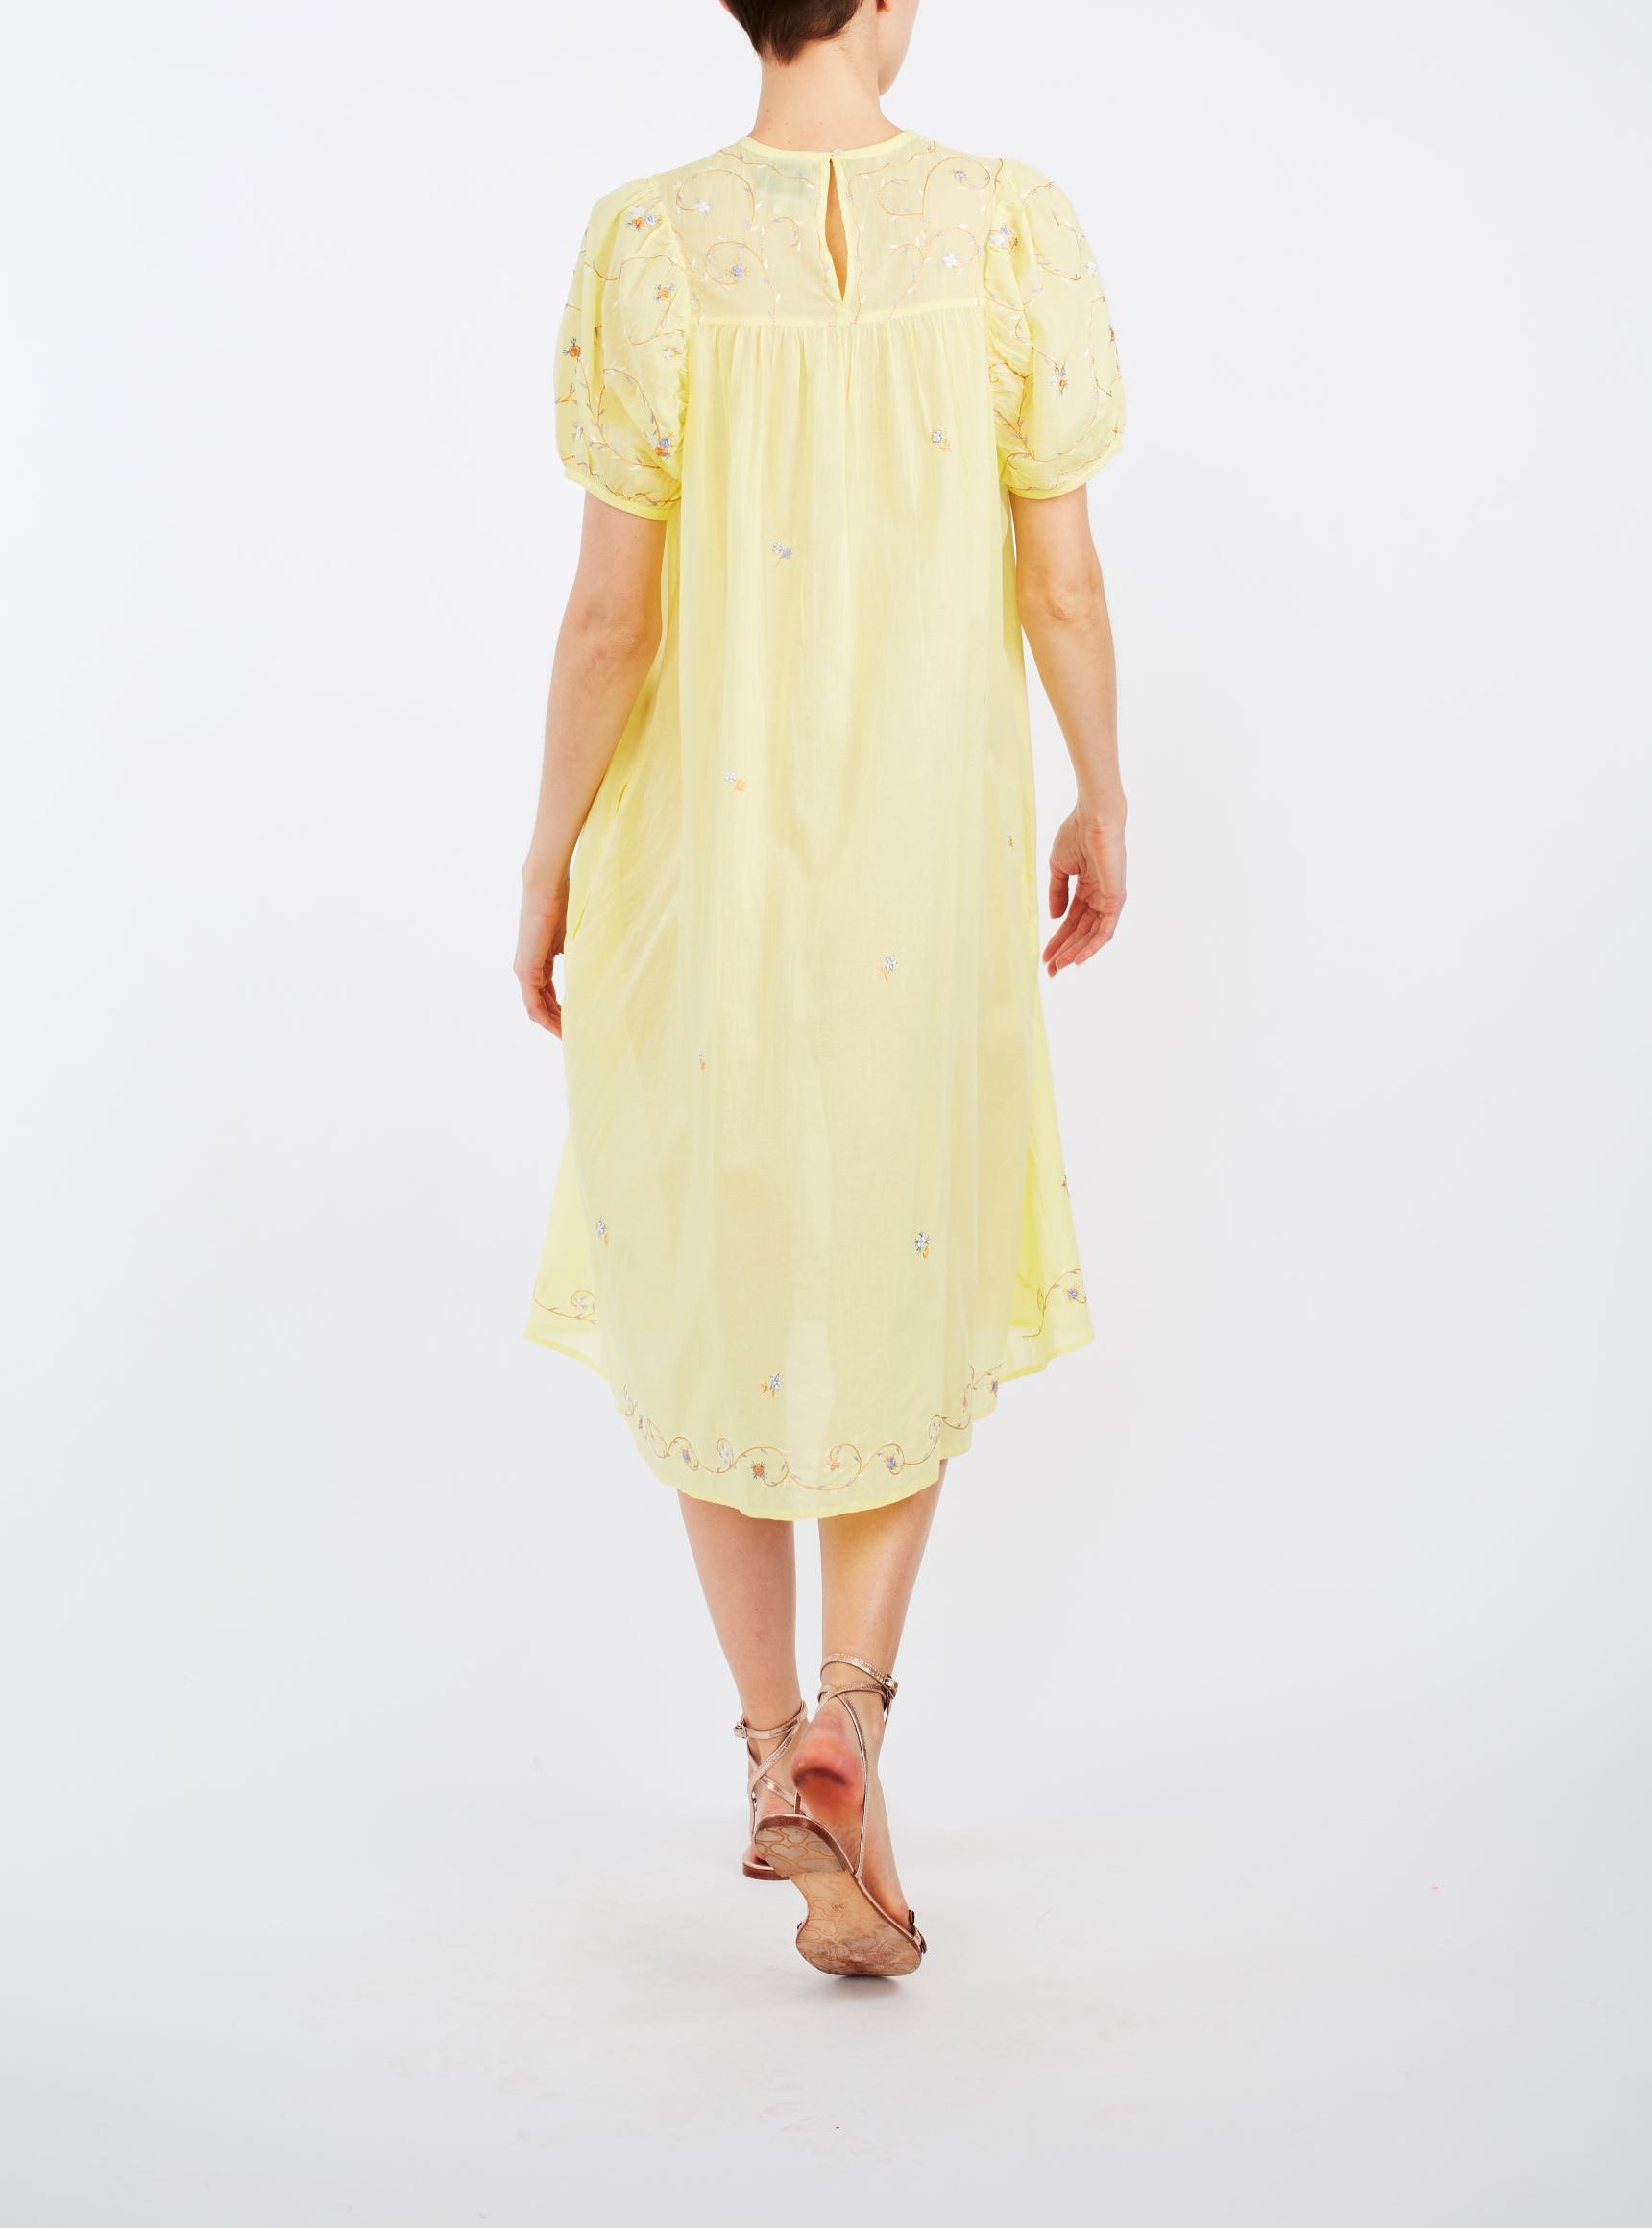 Back view of Olympia Sweet Lemon cotton Dress by Thierry Colson